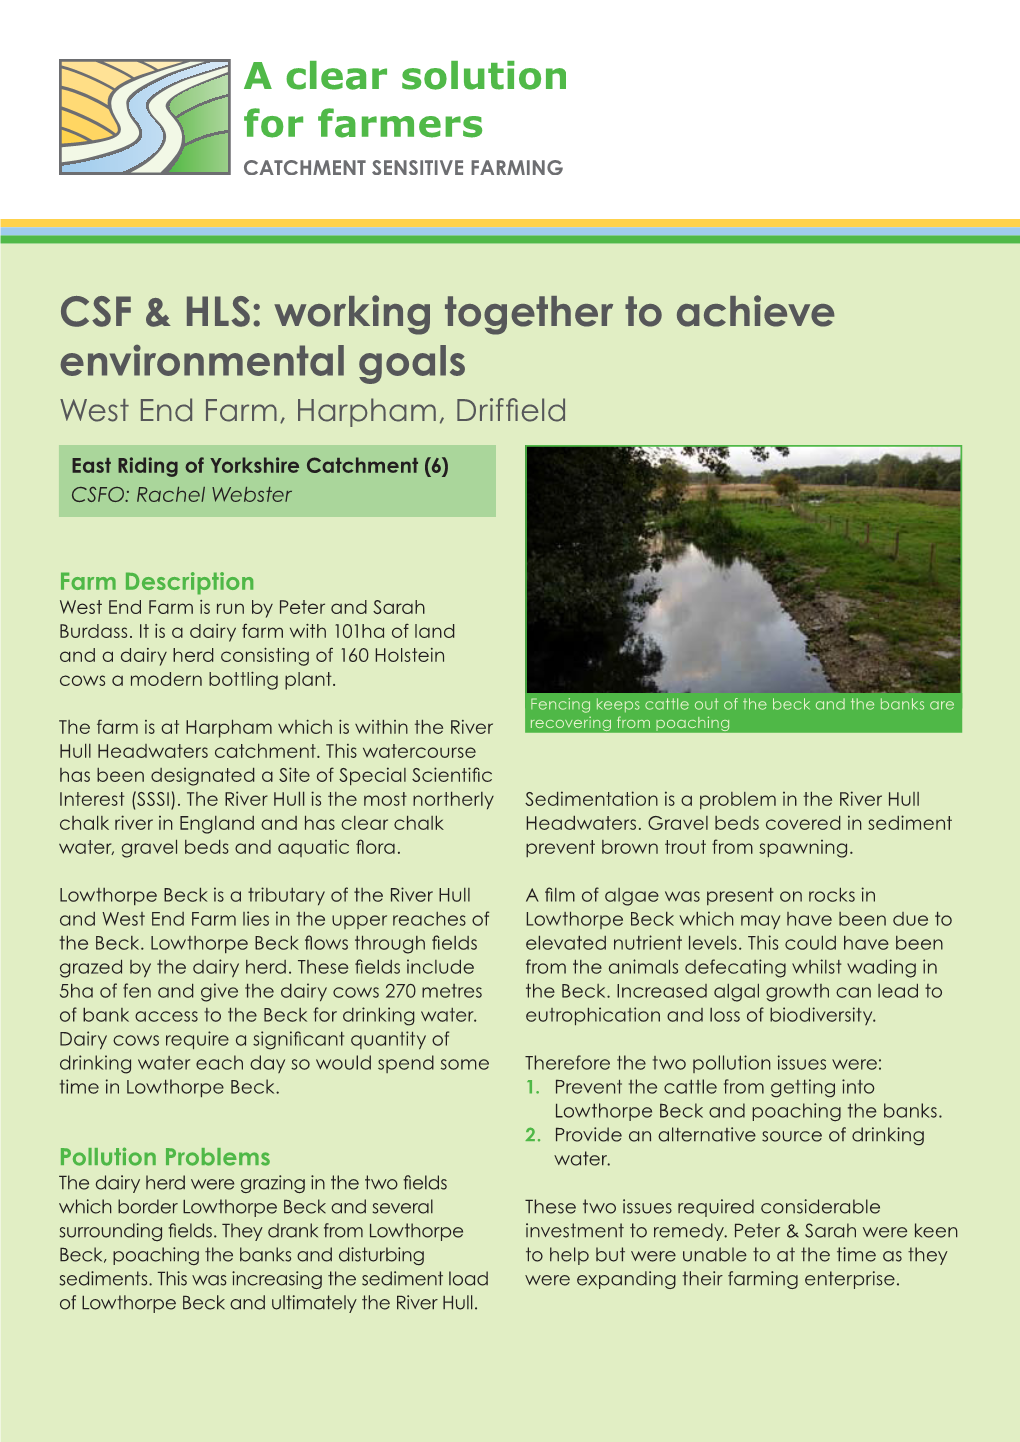 CSF & HLS: Working Together to Achieve Environmental Goals